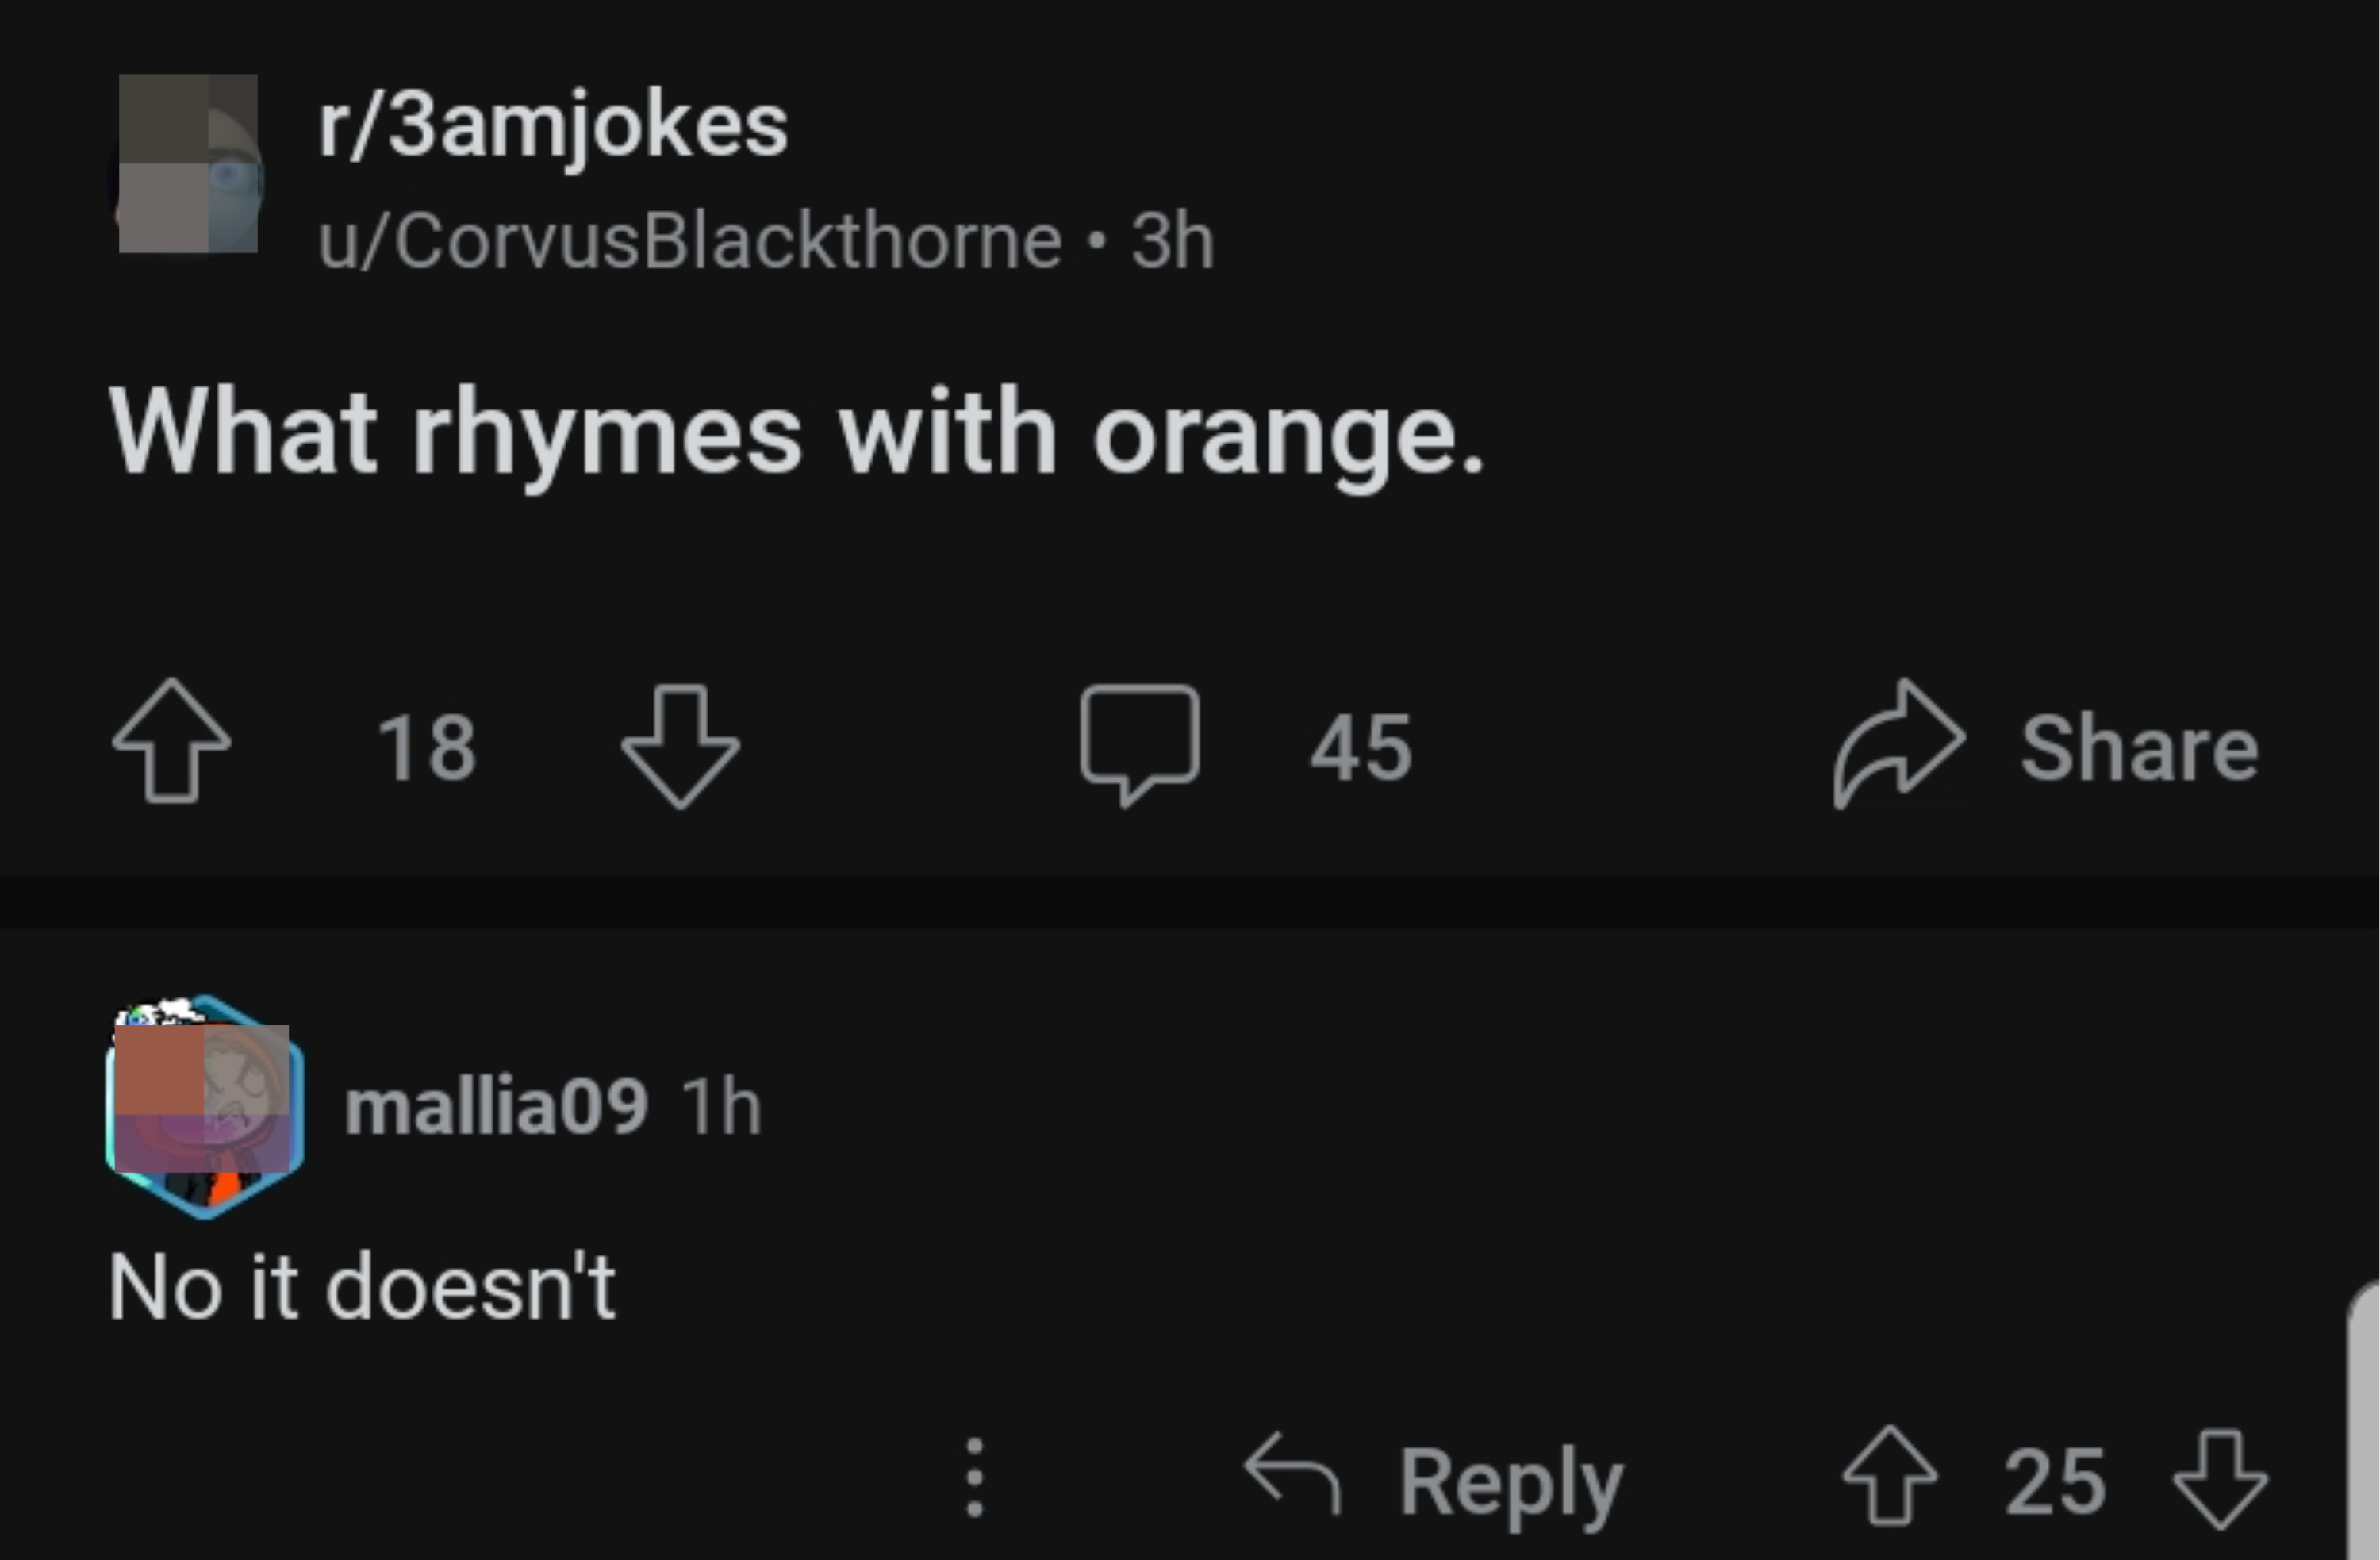 &quot;What rhymes with orange,&quot; &quot;No it doesn&#x27;t&quot;